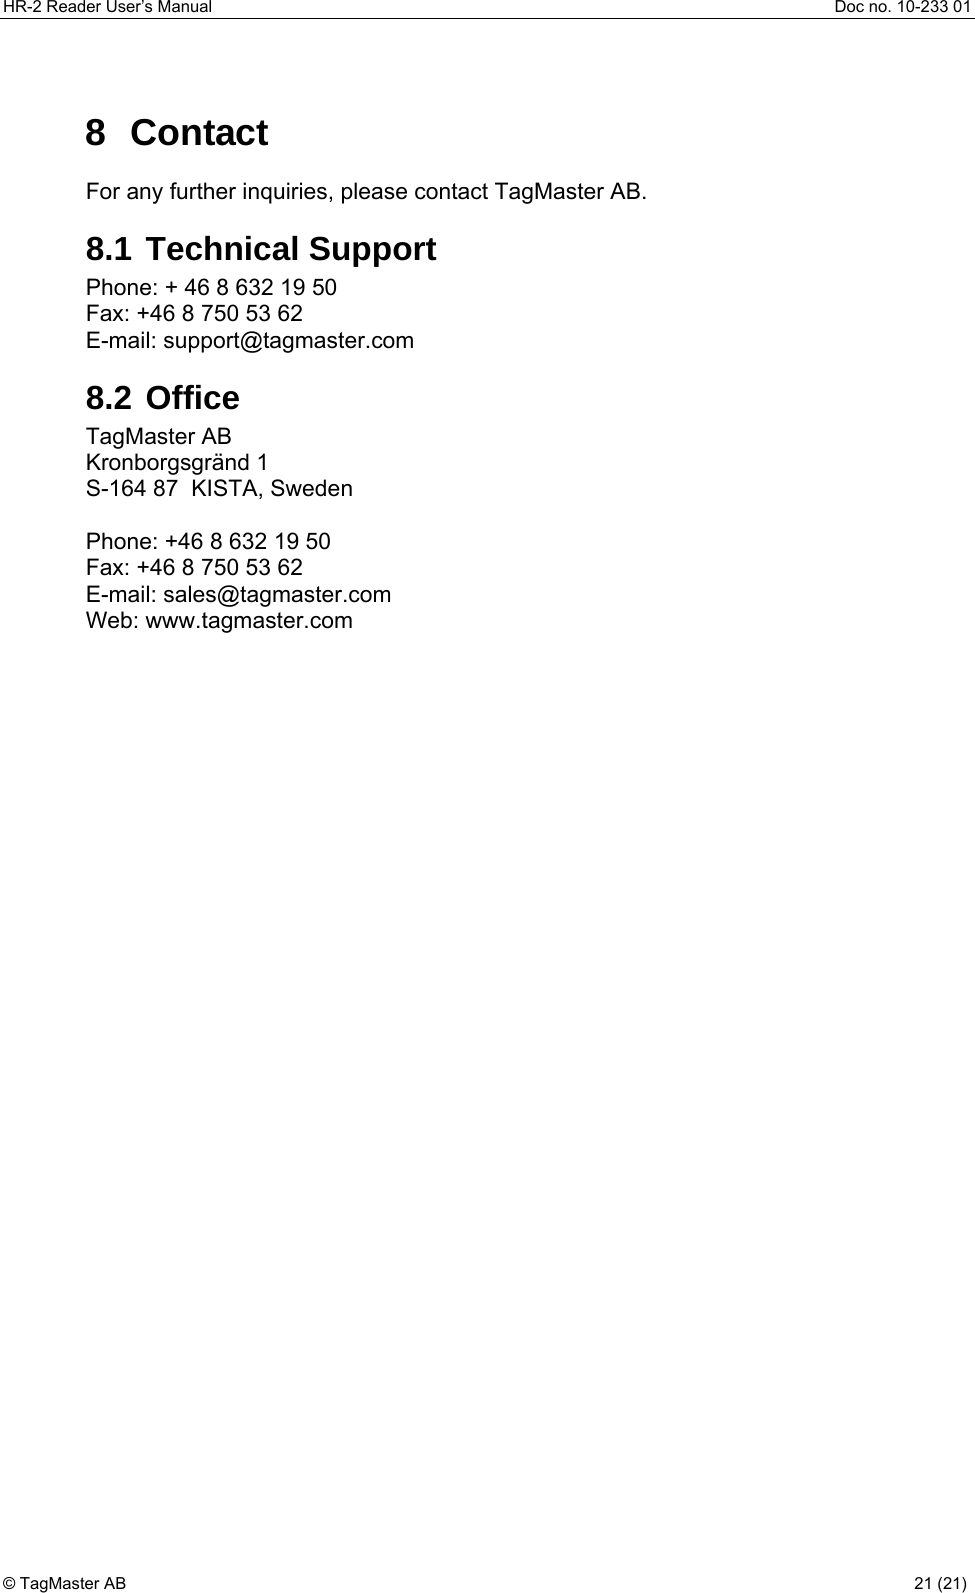 HR-2 Reader User’s Manual  Doc no. 10-233 01 © TagMaster AB  21 (21)   8 Contact For any further inquiries, please contact TagMaster AB. 8.1 Technical Support Phone: + 46 8 632 19 50 Fax: +46 8 750 53 62 E-mail: support@tagmaster.com 8.2 Office TagMaster AB Kronborgsgränd 1 S-164 87  KISTA, Sweden  Phone: +46 8 632 19 50 Fax: +46 8 750 53 62 E-mail: sales@tagmaster.com Web: www.tagmaster.com 